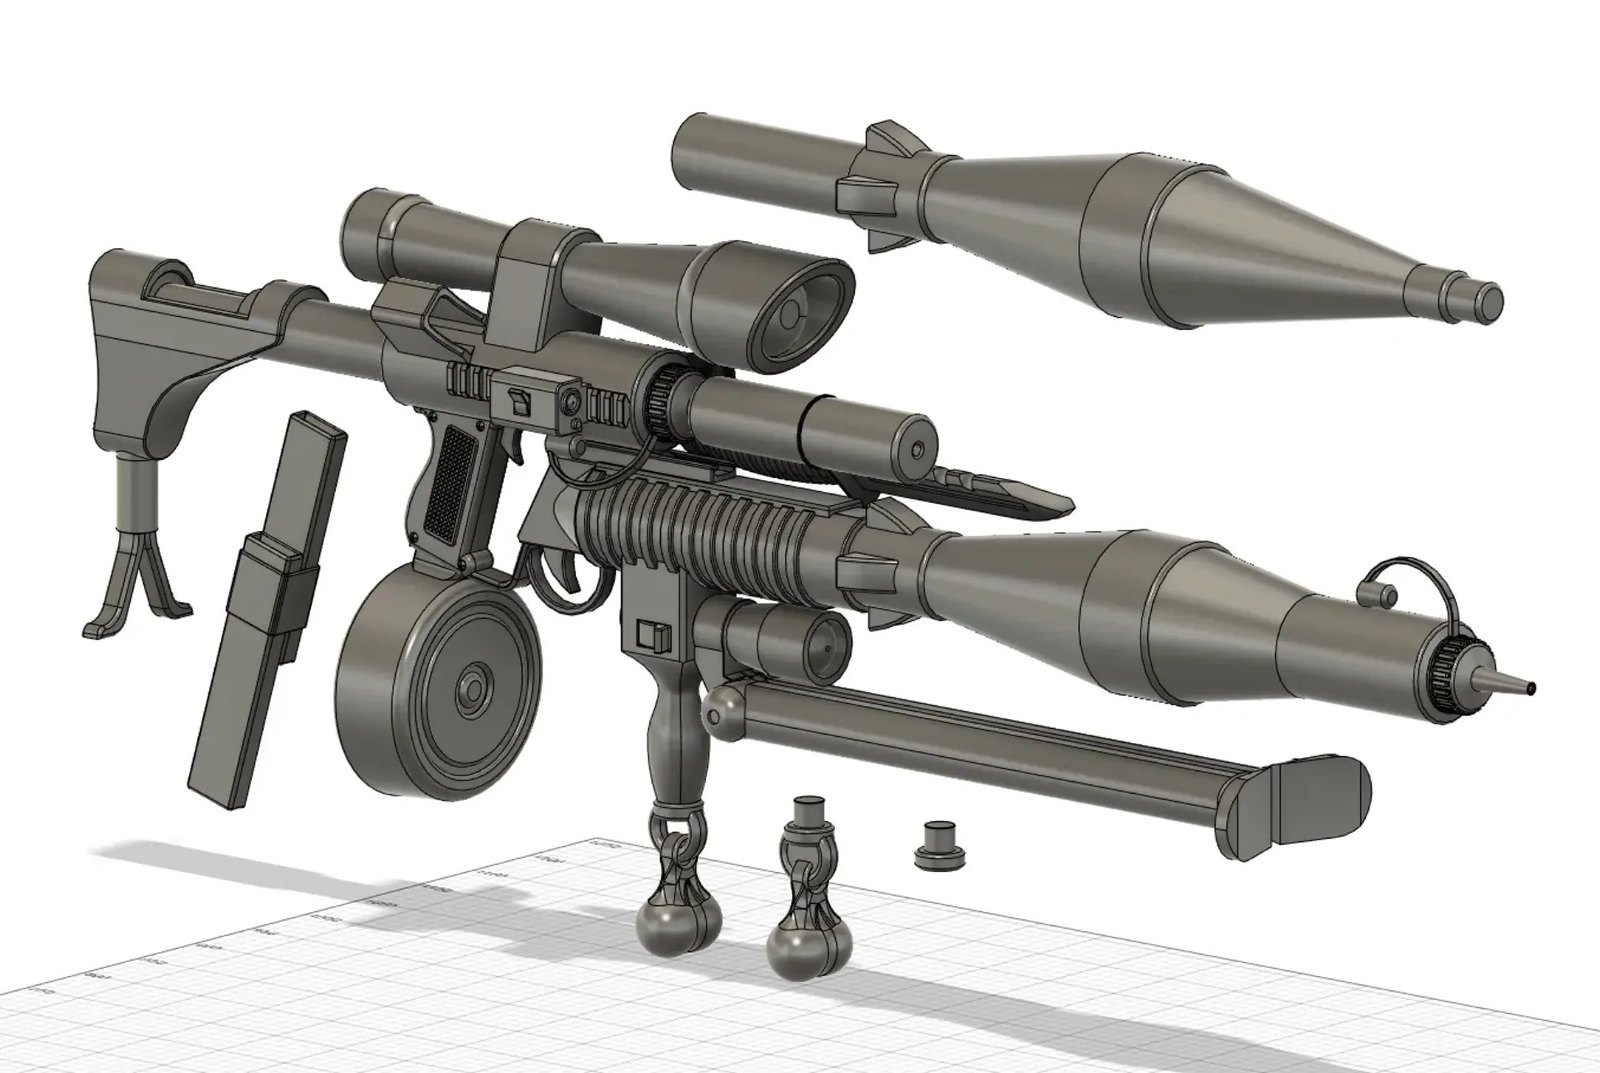 3D printable Star Wars parts and weapons for 1:6 figures (New models added, more updates in future) - Page 3 52701966627_f08b65eeb0_h